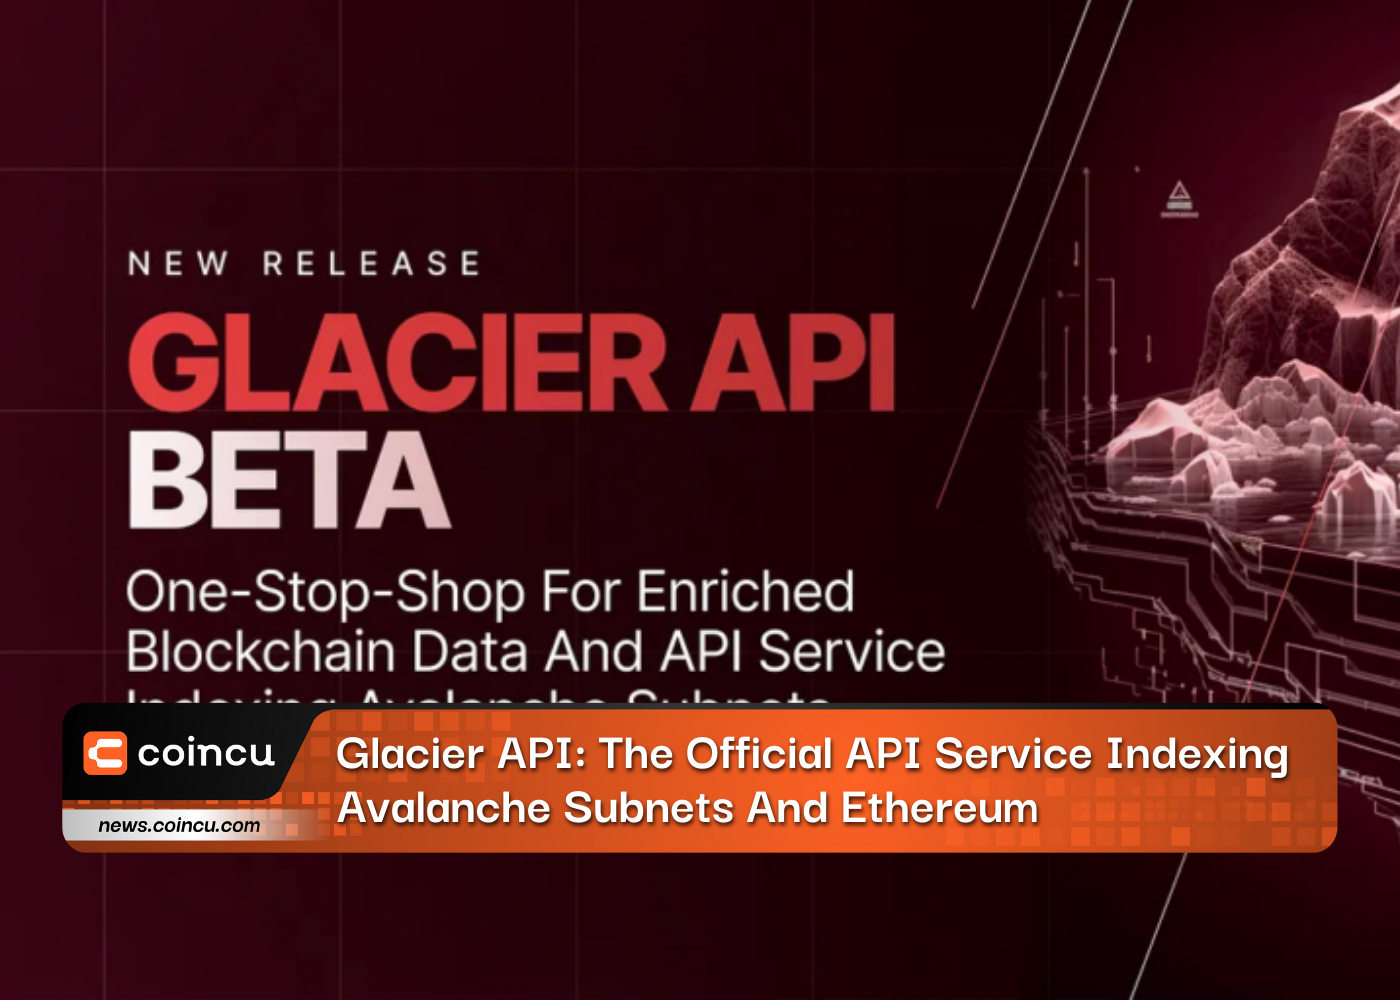 Glacier API: The Official API Service Indexing Avalanche Subnets And Ethereum